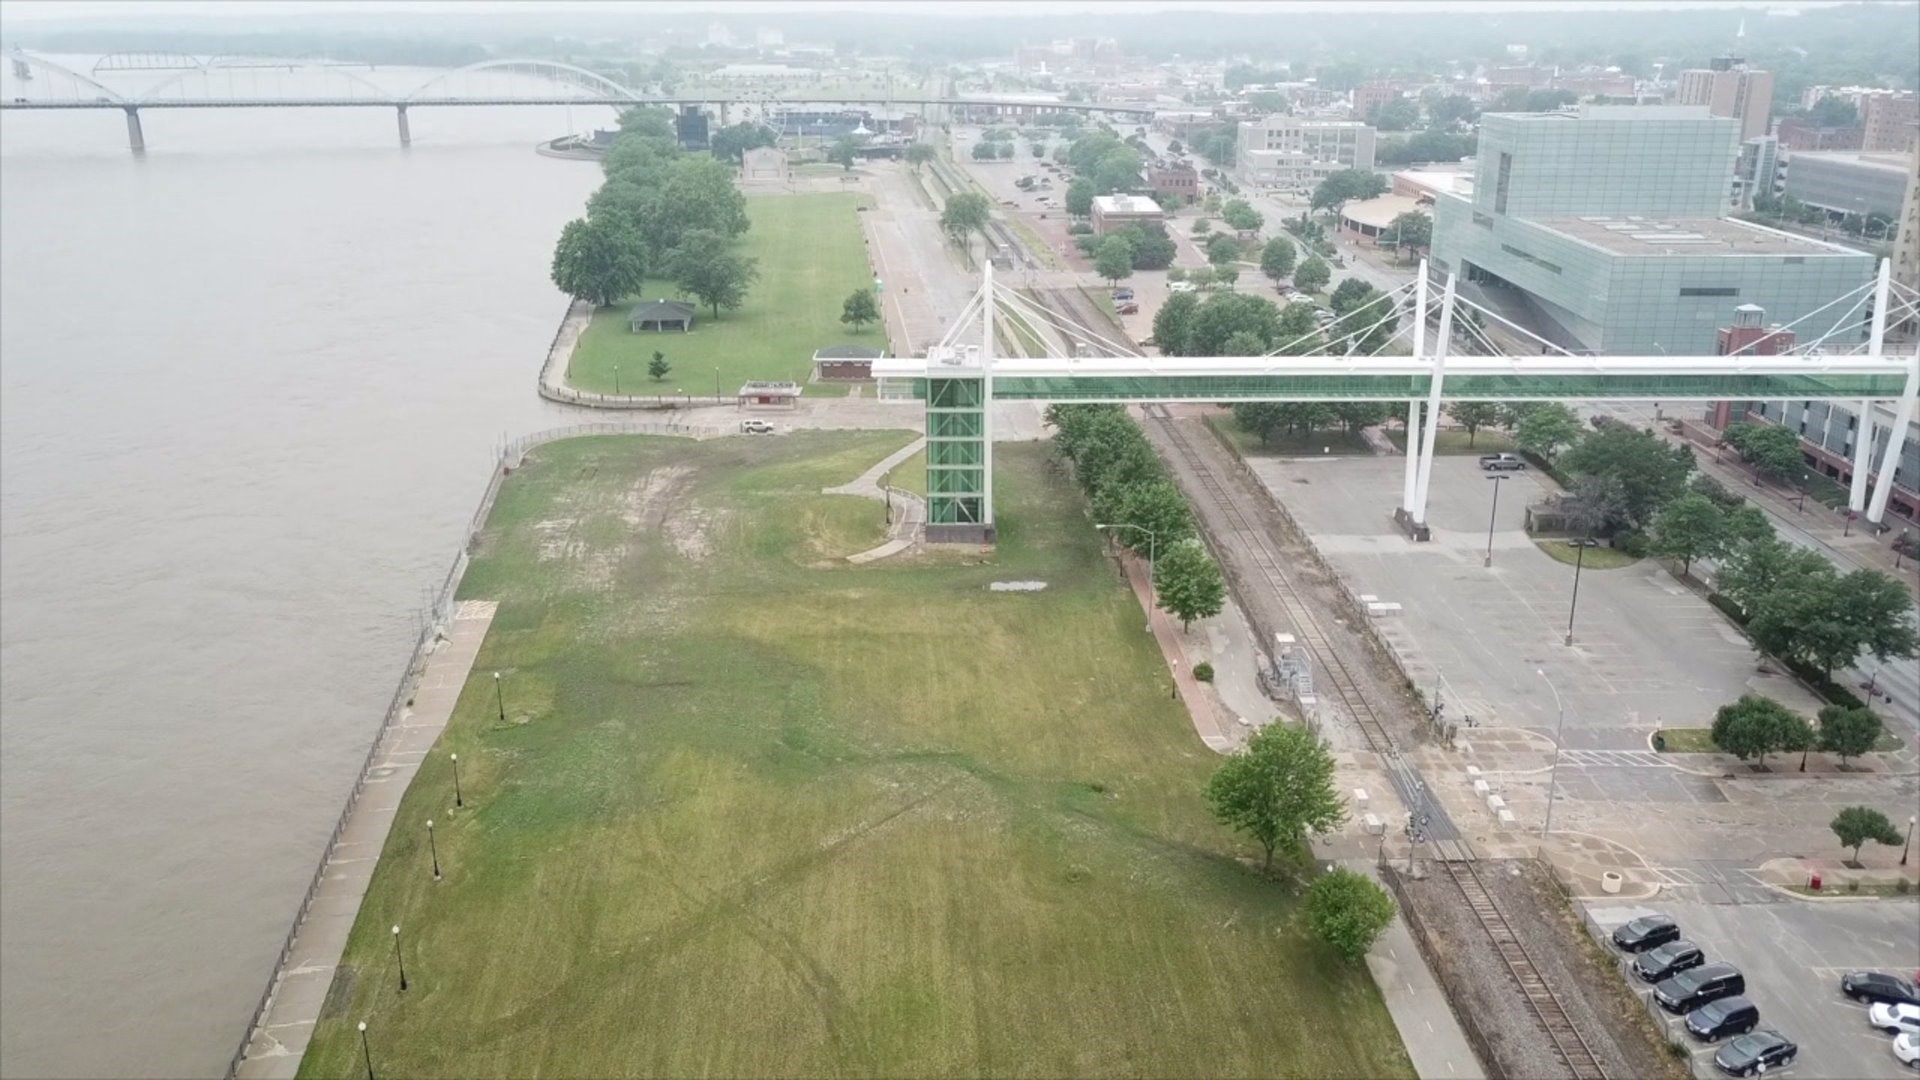 Davenport`s application for $20-million federal grant could build RiverVision